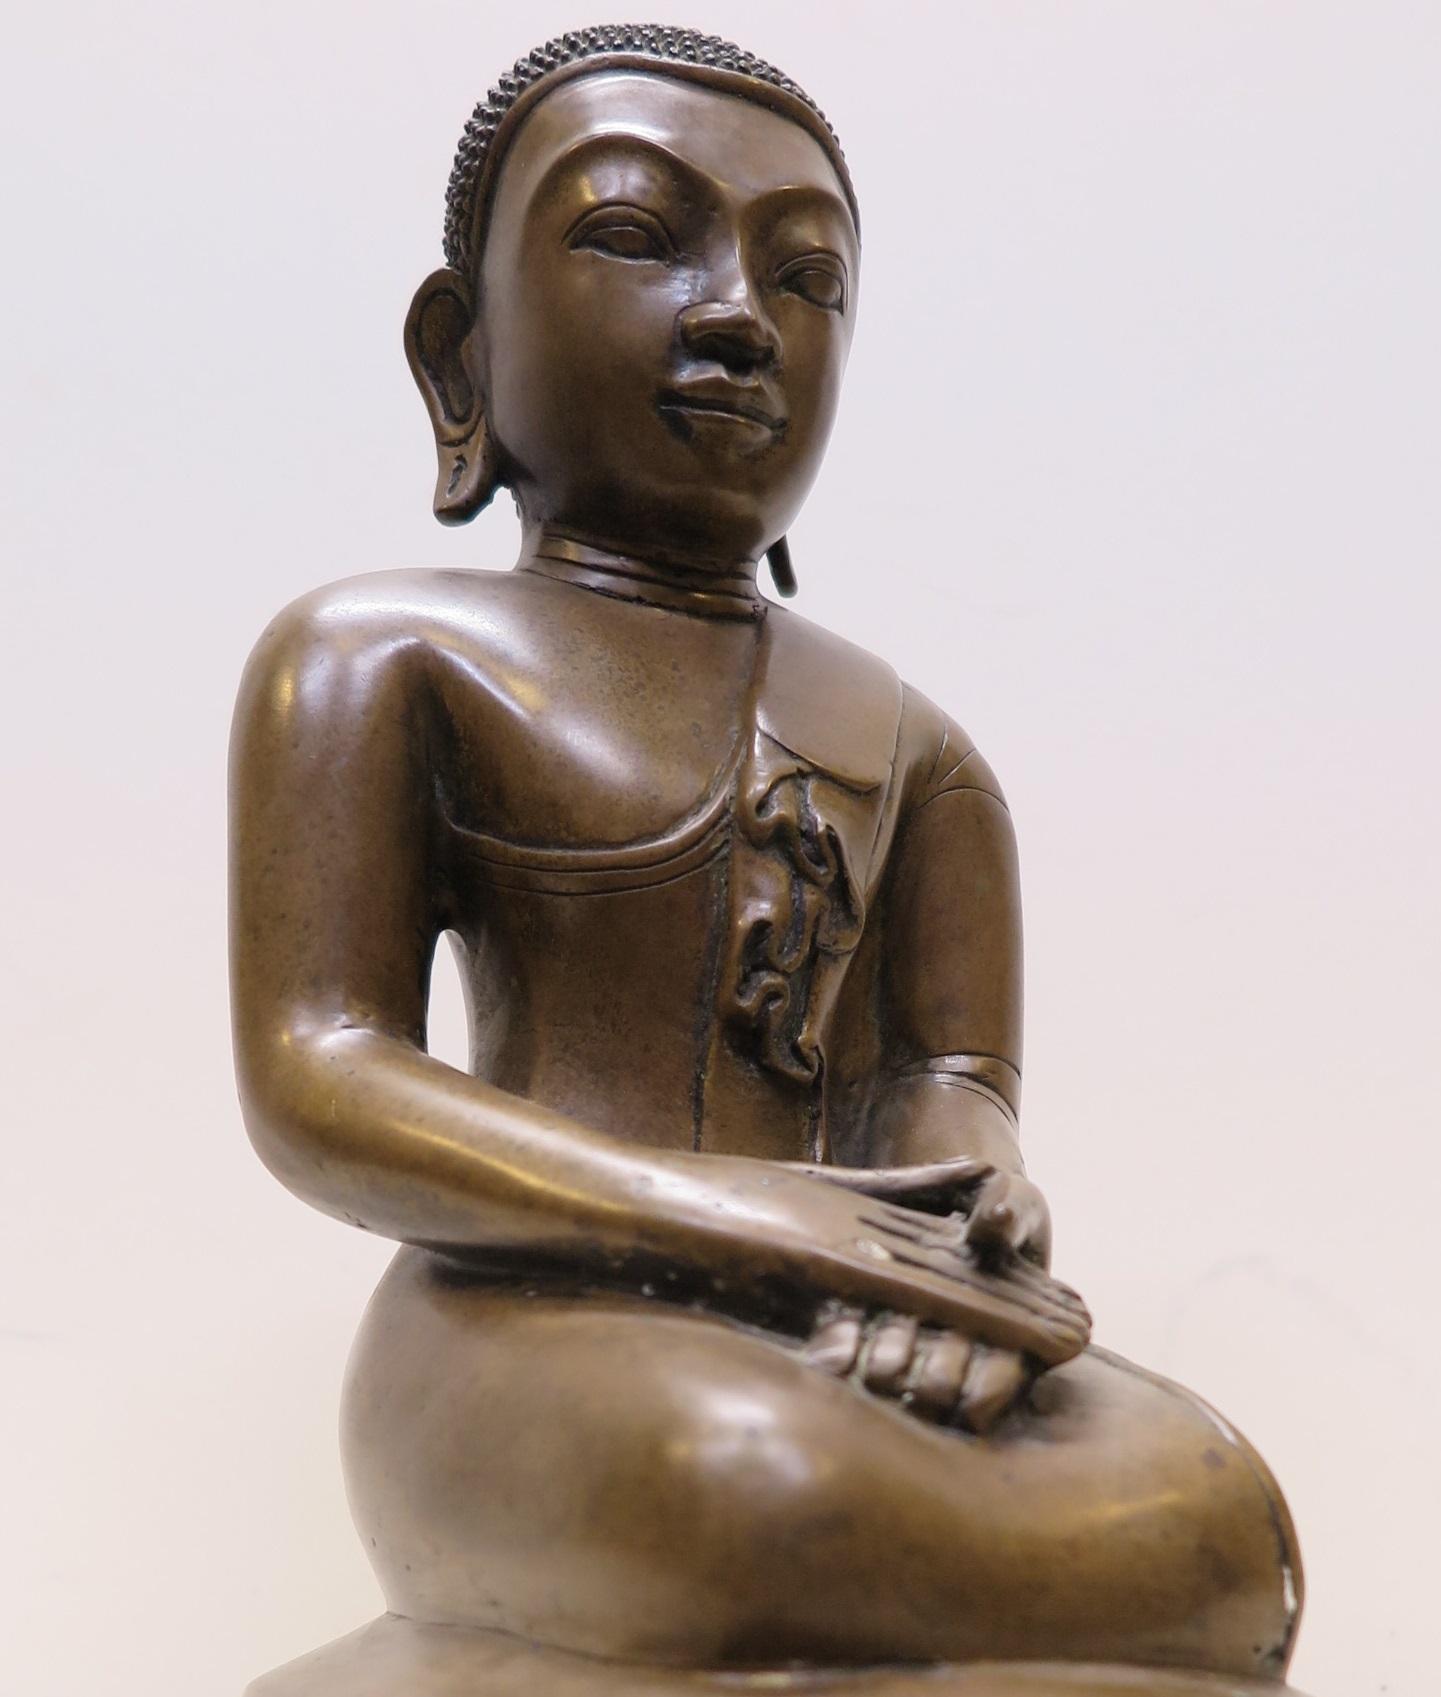 Bronze Burmese Buddhist statue lost wax casting Mandalay period (Burma) Myanmar. Beautiful example of Burmese Mandalay period bronze casting. Fluid graceful lines of the body outlining broad proud shoulders with robe draped to right perfectly